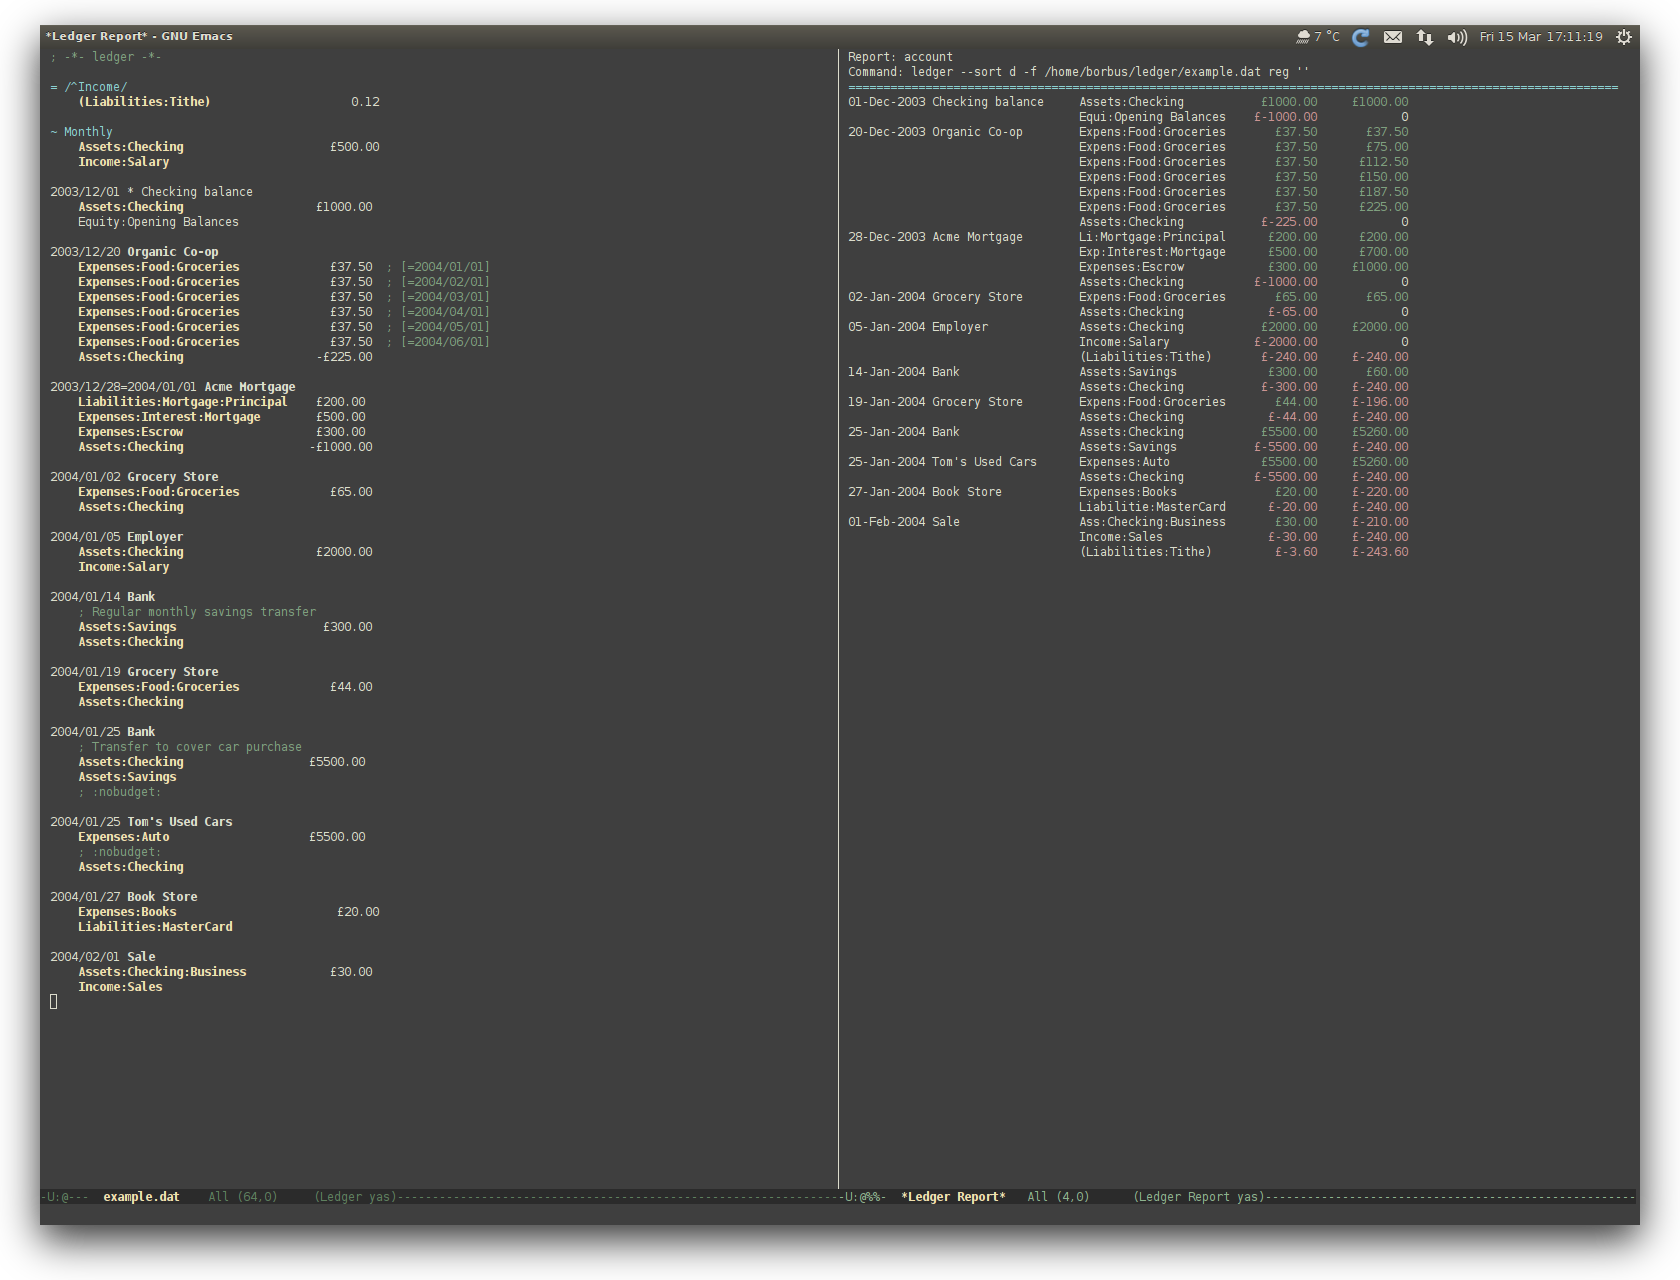 /TakeV/spacemacs/media/commit/b29446195764e4c63db430ef2ddc65661c3101d2/layers/finance/img/ledger.png